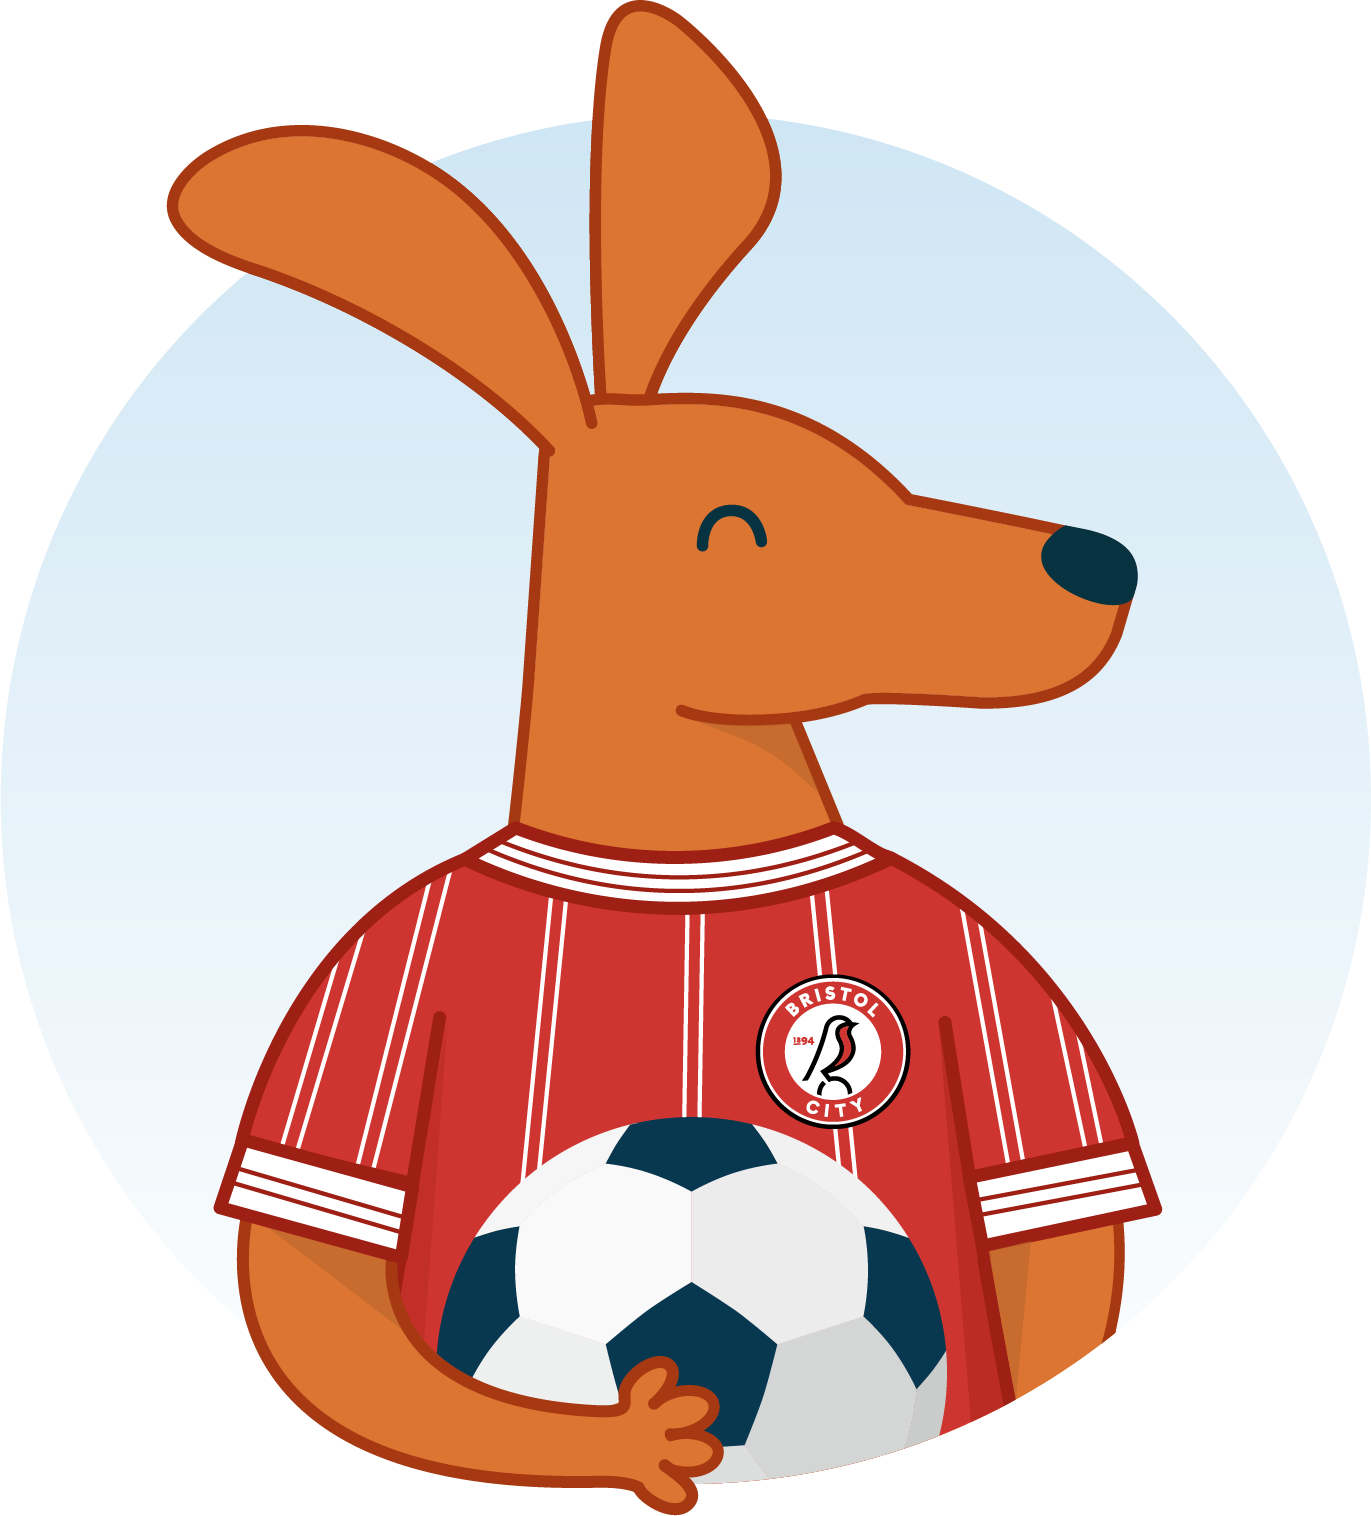 Skippy in a red a white shirt with the Bristol City logo holding a football